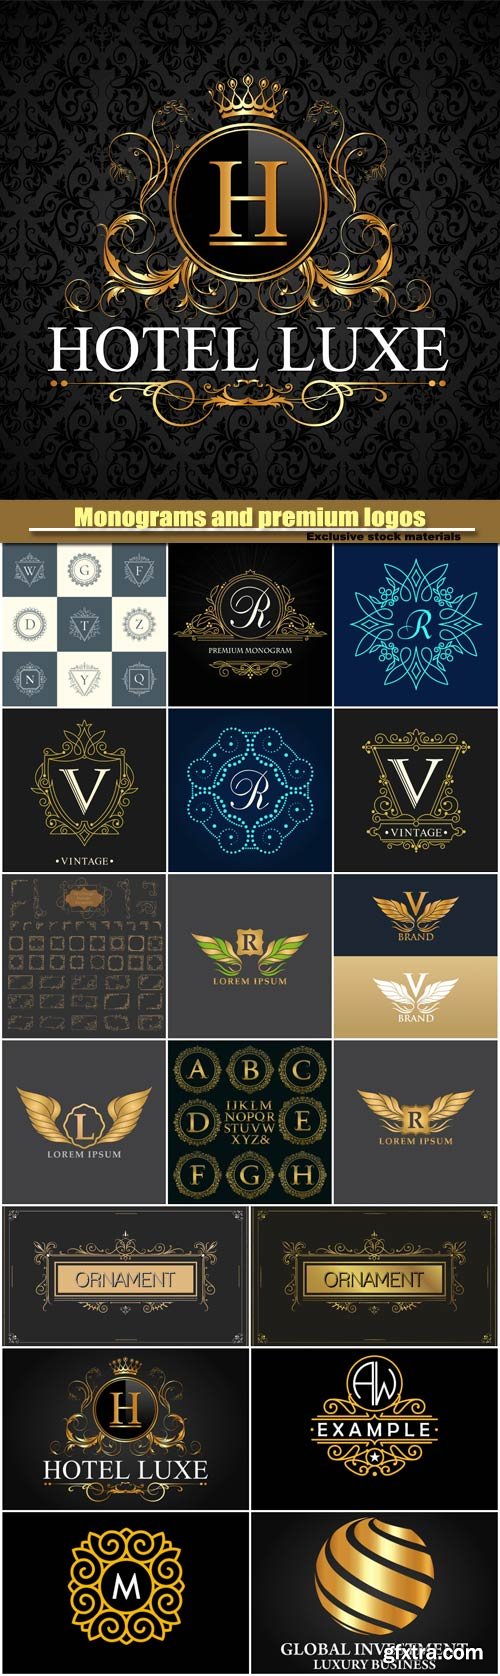 Monograms and premium logos in vector, vintage frames and ornaments